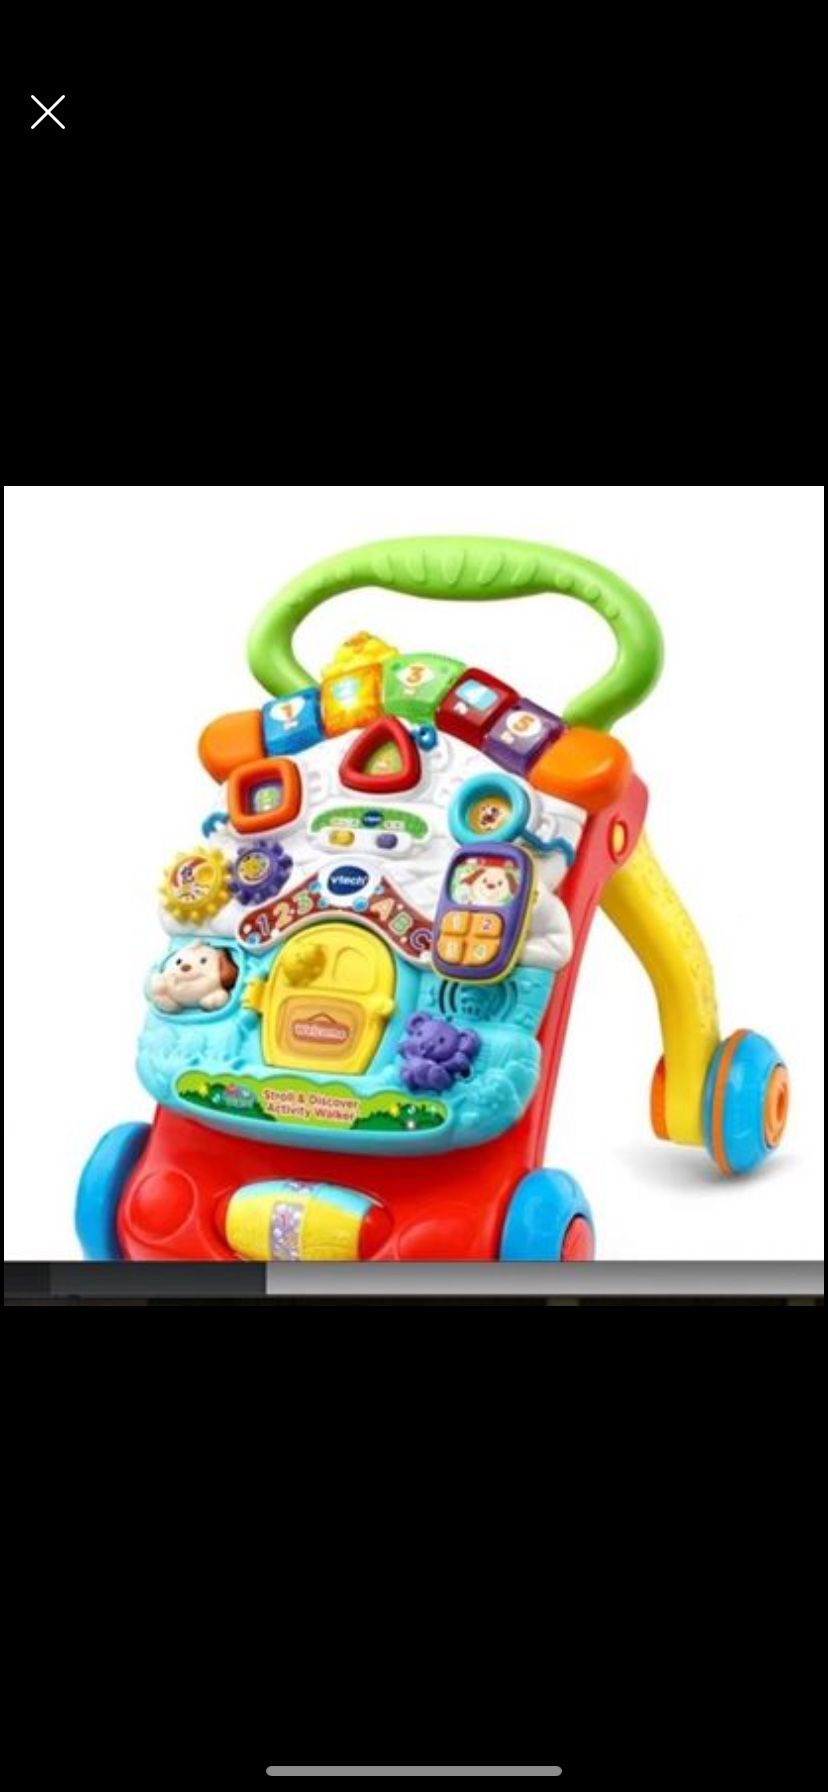 VTech Stroll and Discover Activity Walker 2 -in-1 Toddler Toy